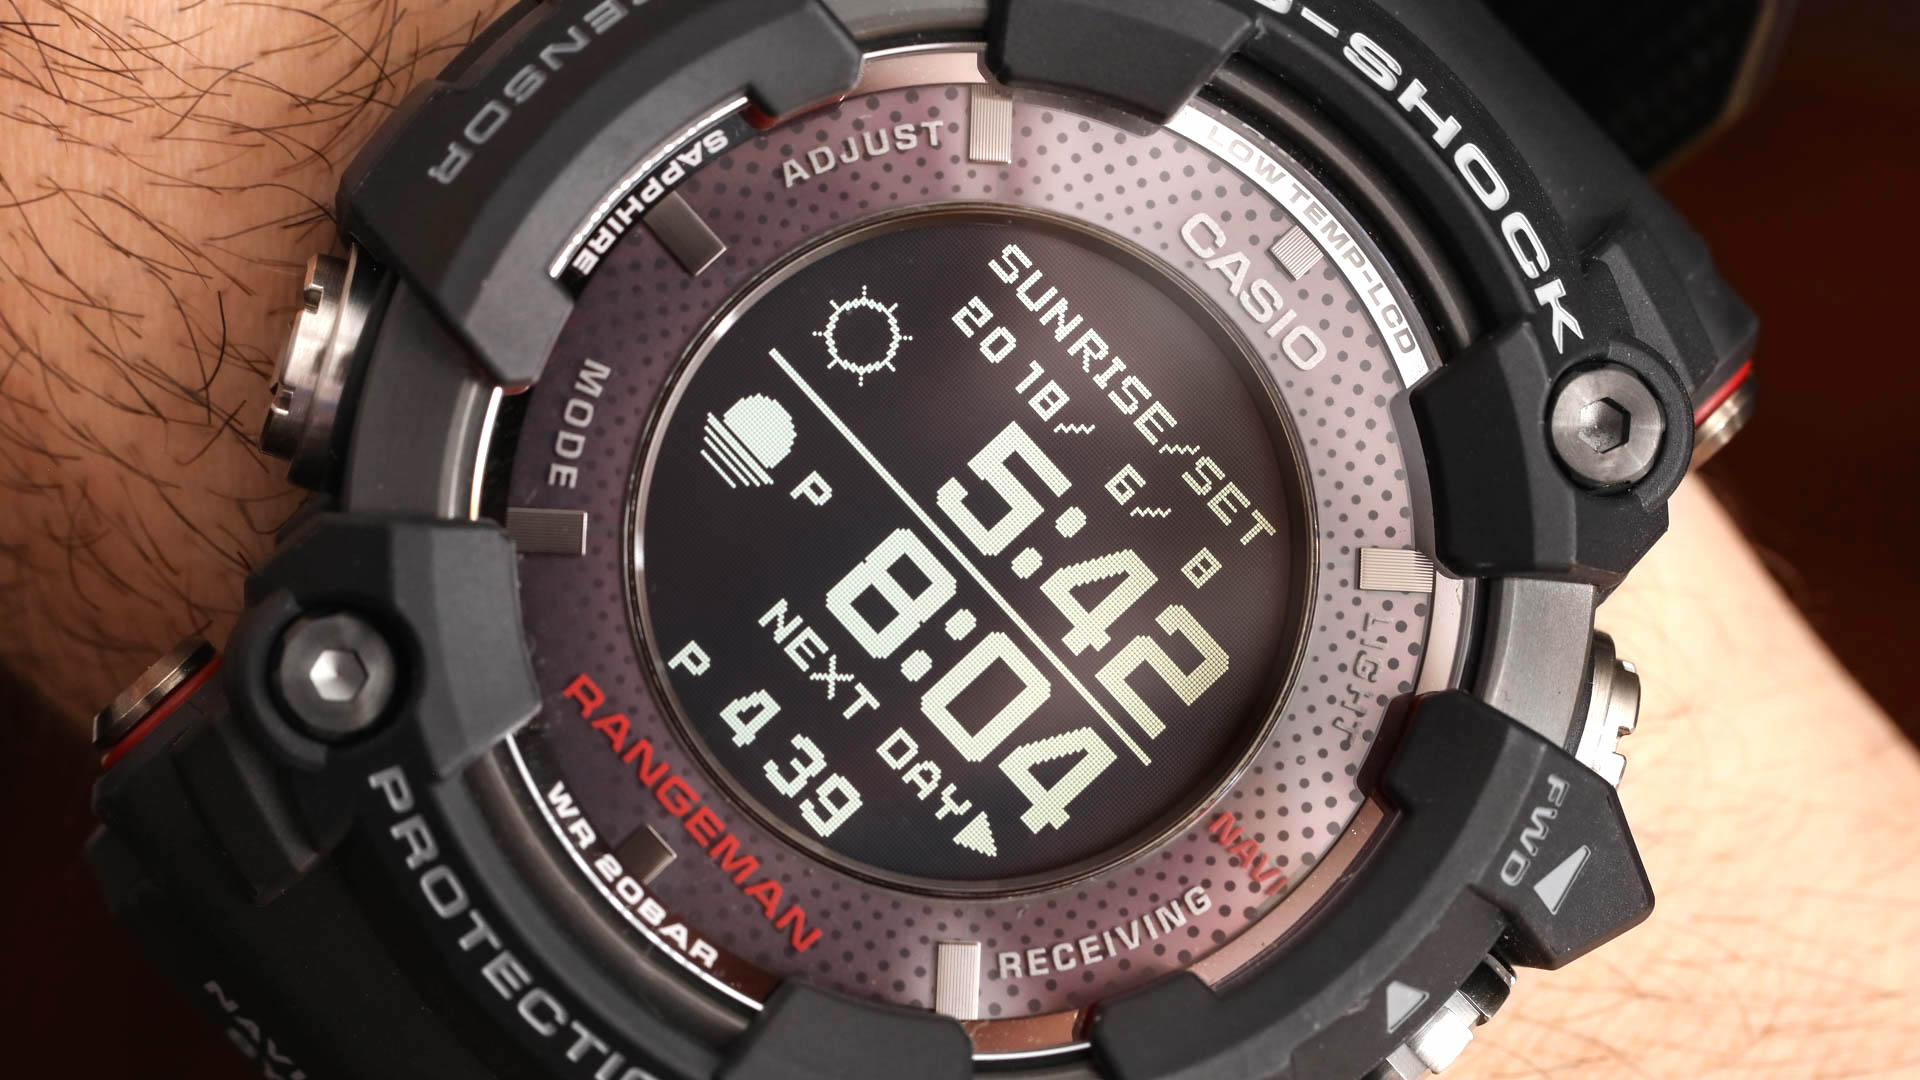 Casio G-Shock GPRB1000-1 GPS Watch Review | Page 2 of | aBlogtoWatch